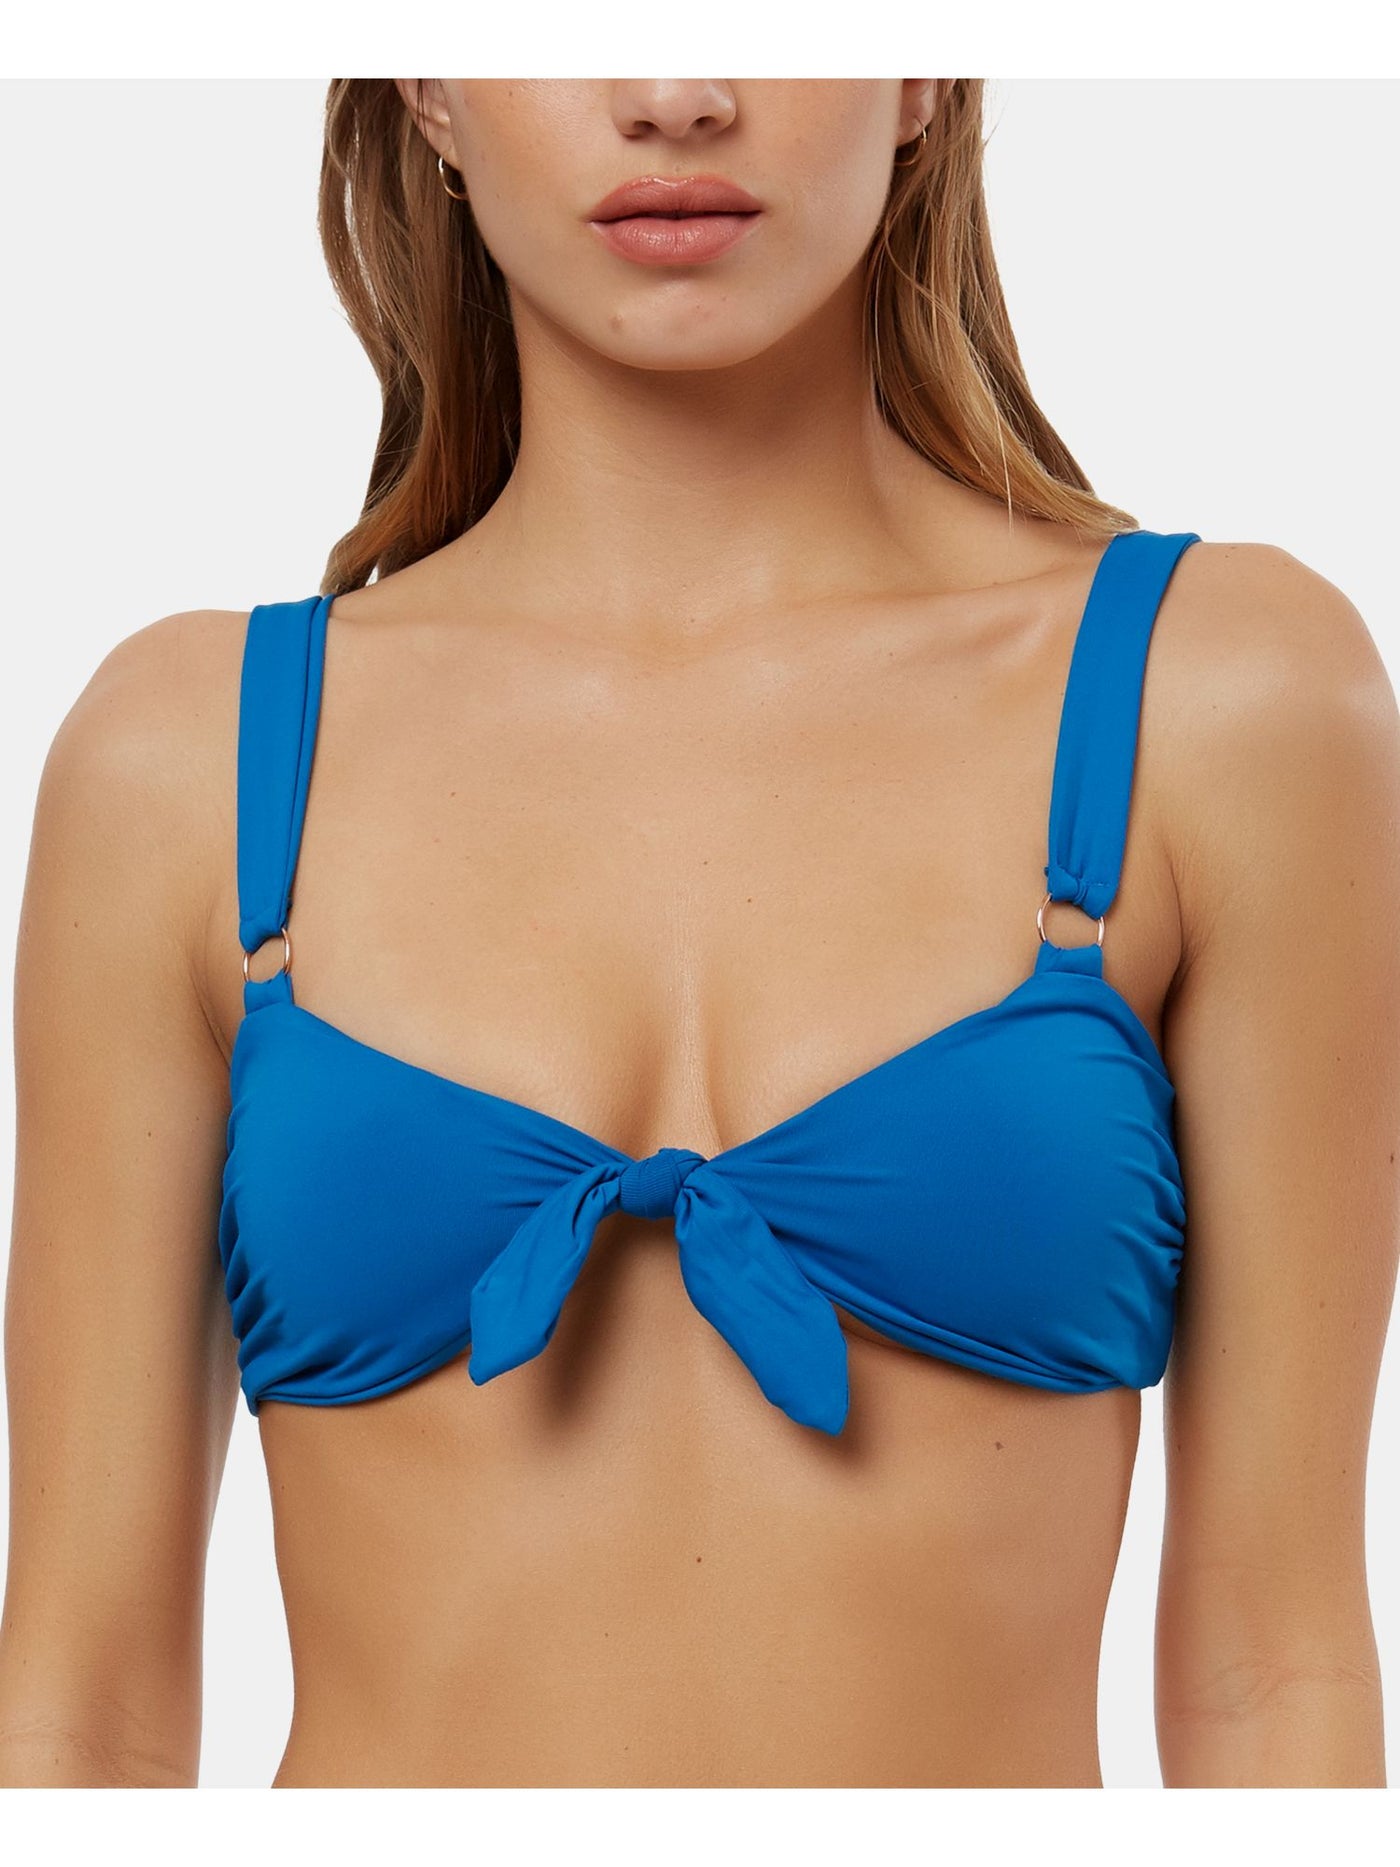 O'NEILL Women's Blue Stretch Tie-Front Removable Cups Bikini Sweetheart Ring Salt Water Solids Nicolette Swimsuit Top XL